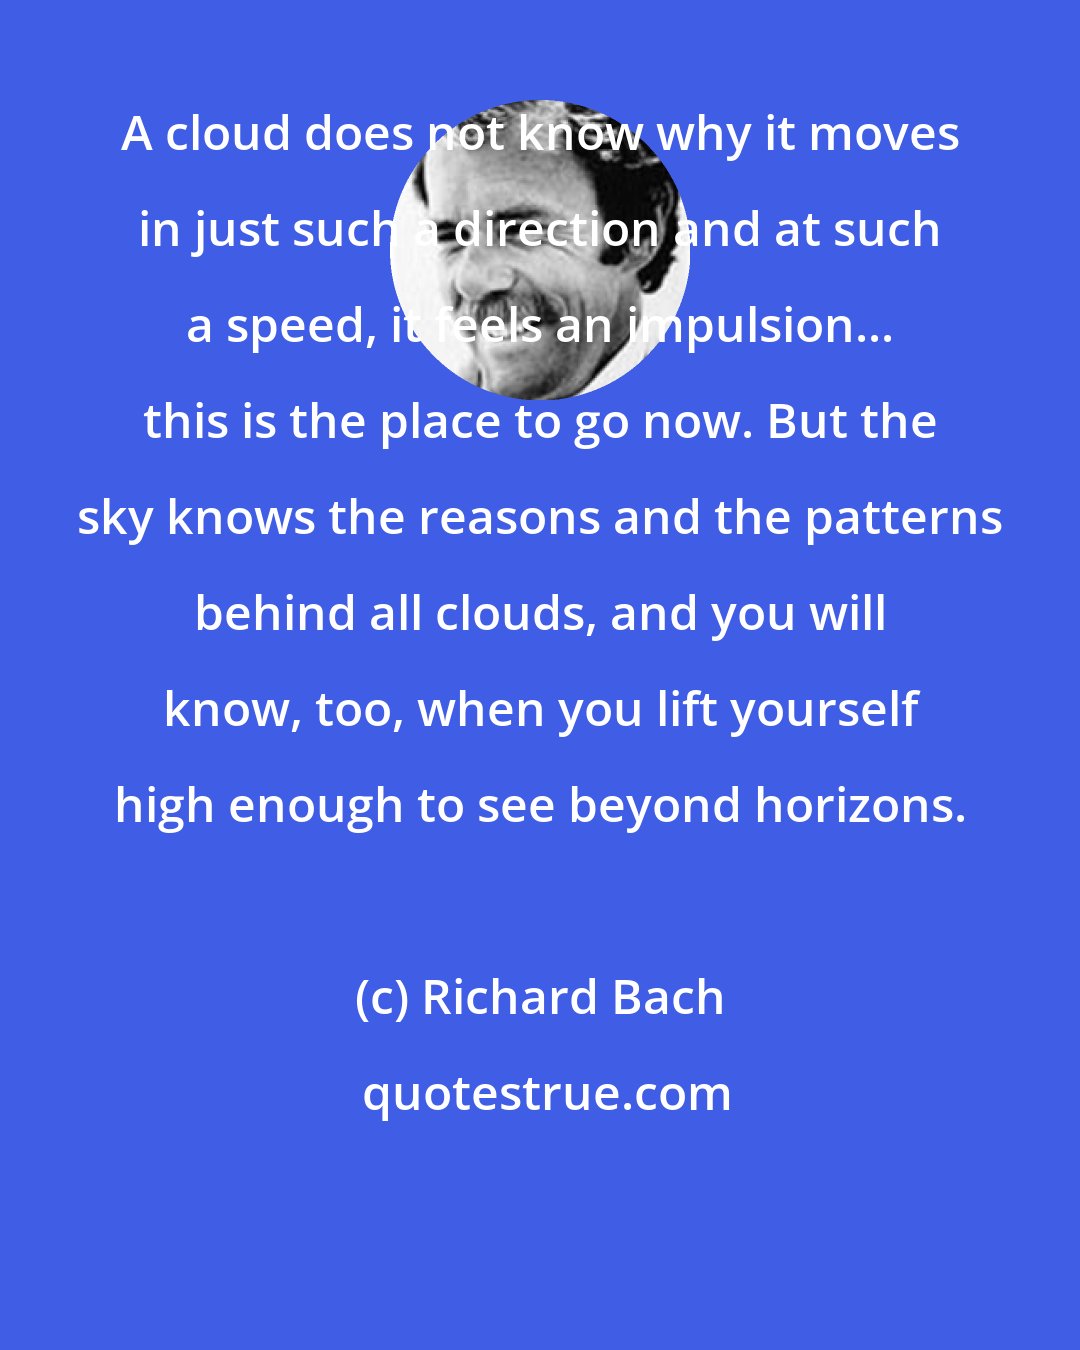 Richard Bach: A cloud does not know why it moves in just such a direction and at such a speed, it feels an impulsion... this is the place to go now. But the sky knows the reasons and the patterns behind all clouds, and you will know, too, when you lift yourself high enough to see beyond horizons.